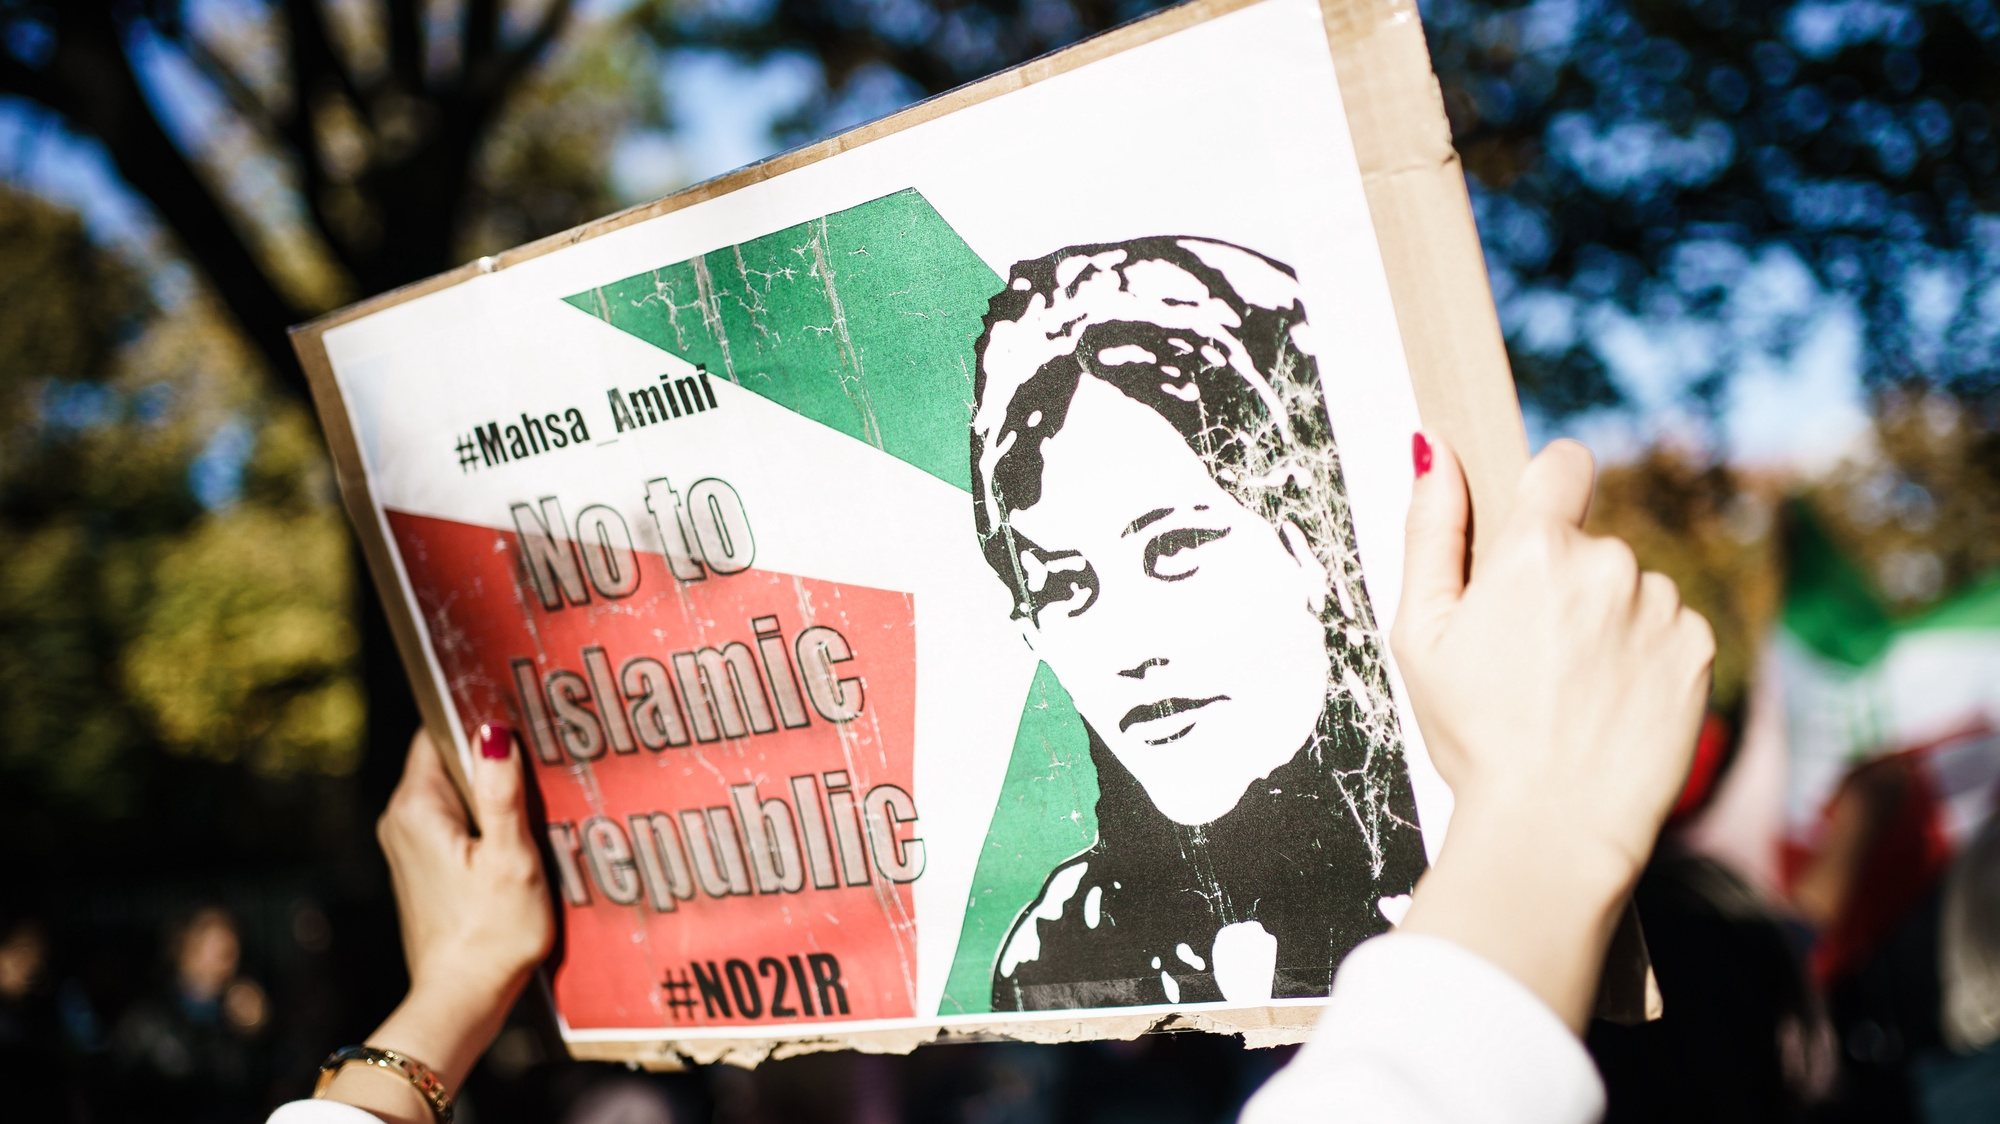 epa10259099 A female demonstrator holds a cardboard reading &#039;No to Islamic Republic&#039; during a rally in solidarity with Iranian protests following the death of Mahsa Amini, in Berlin, Germany, 22 October 2022. Amini, a 22-year-old Iranian woman, was arrested in Tehran on 13 September by the police unit responsible for enforcing Iran&#039;s strict dress code for women. She fell into a coma while in police custody and was declared dead on 16 September.  EPA/CLEMENS BILAN